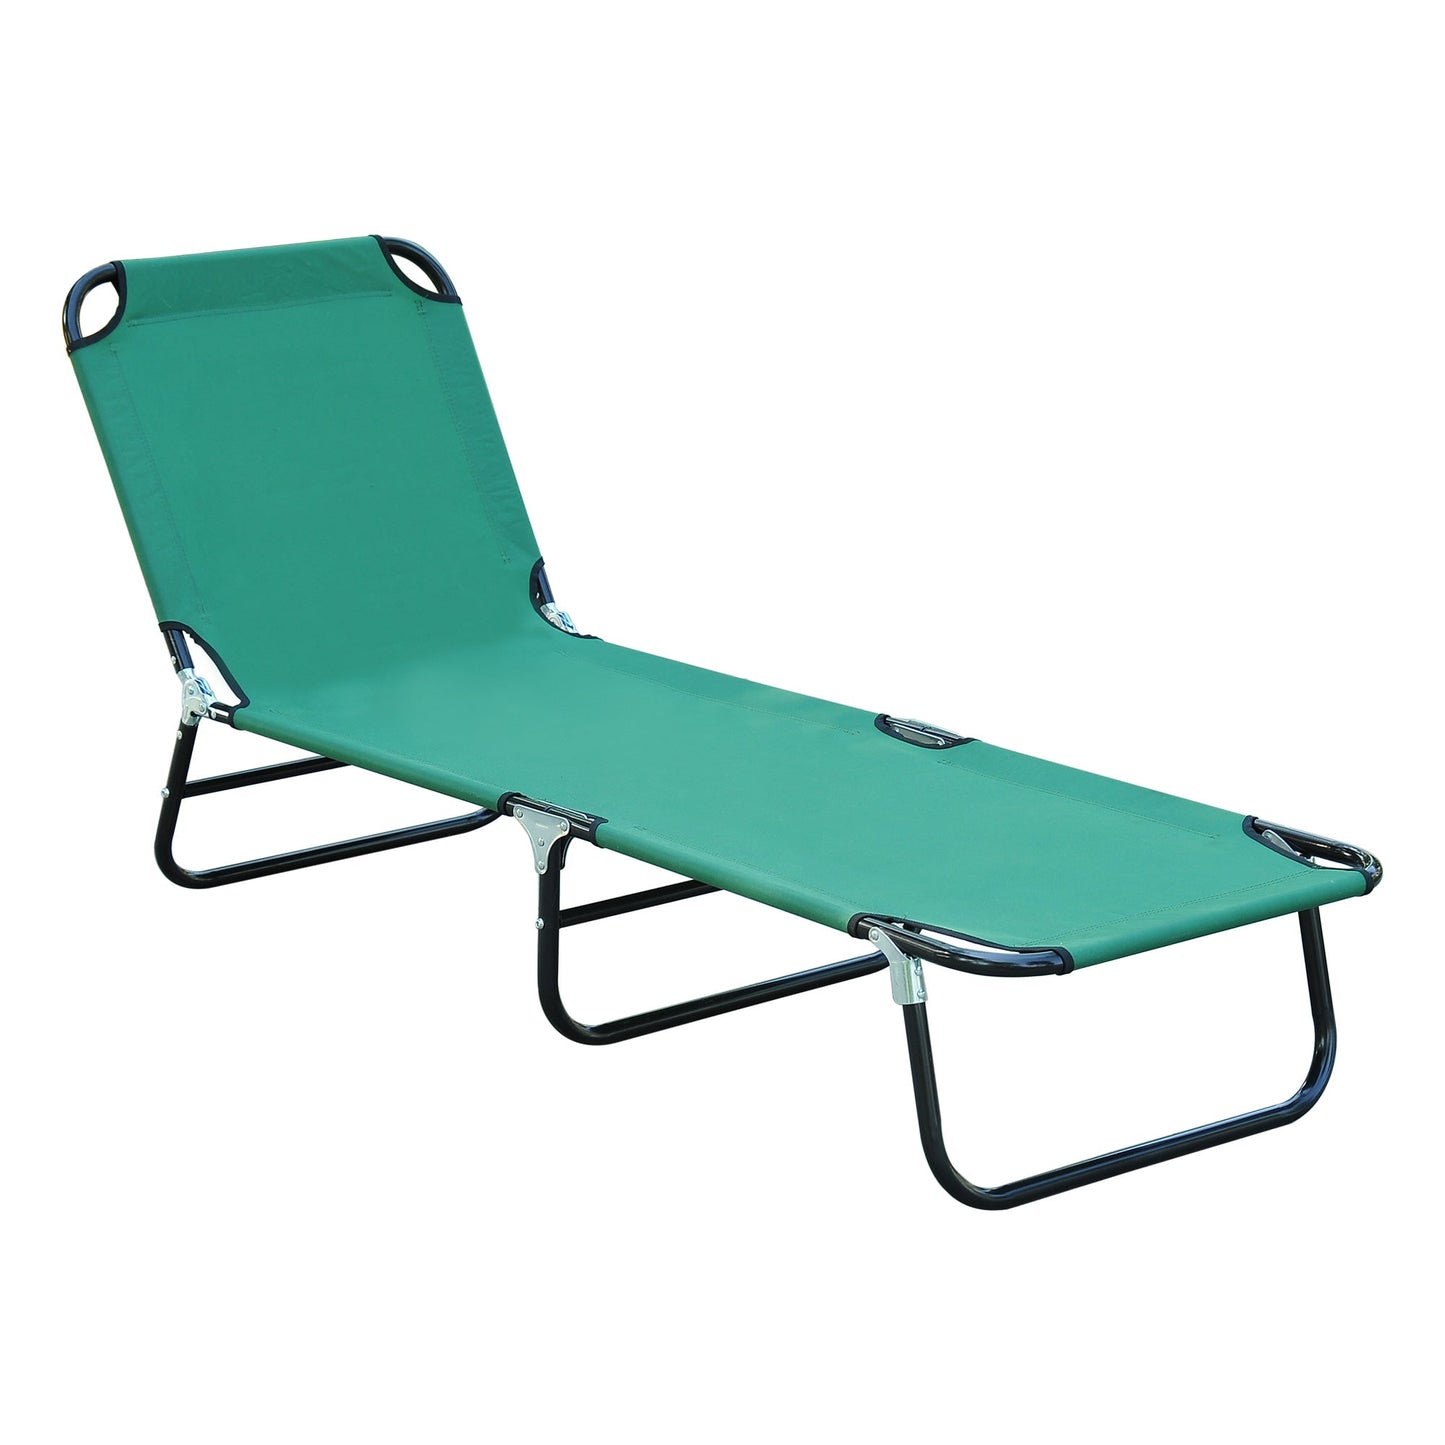 Outdoor and Garden-Portable Outdoor Patio Lounge Chair, Lightweight Folding Sun Chaise Lounger w/ 5-Position Adjustable Backrest for Beach, Poolside, Green - Outdoor Style Company